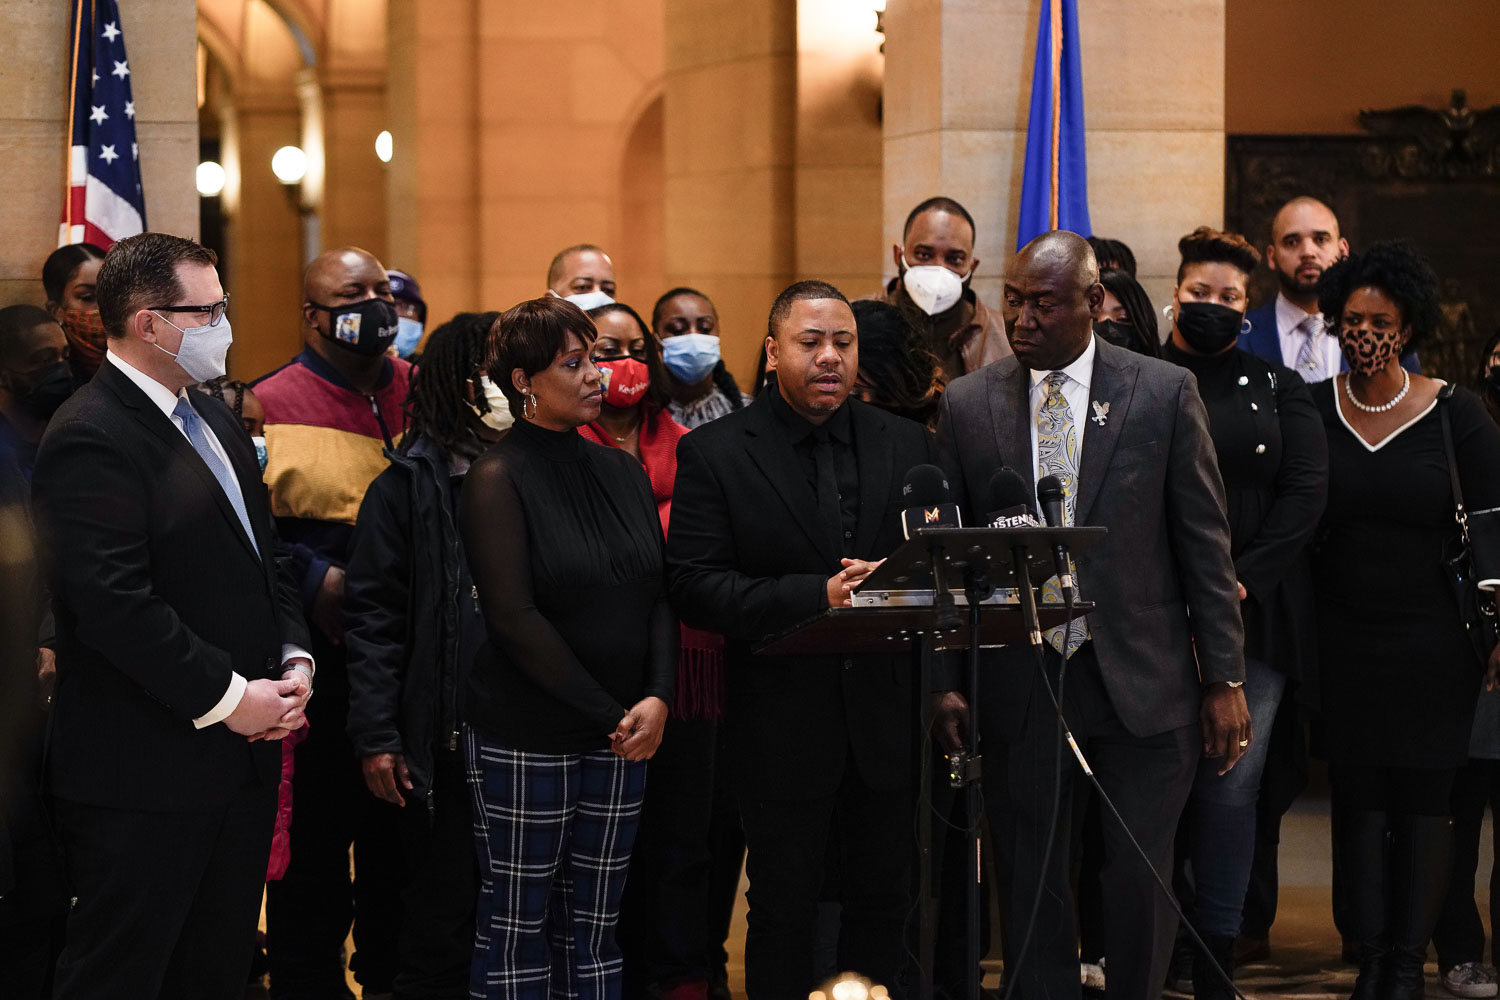 Amir Locke Family and Ben Crump Press Conference, St. Paul